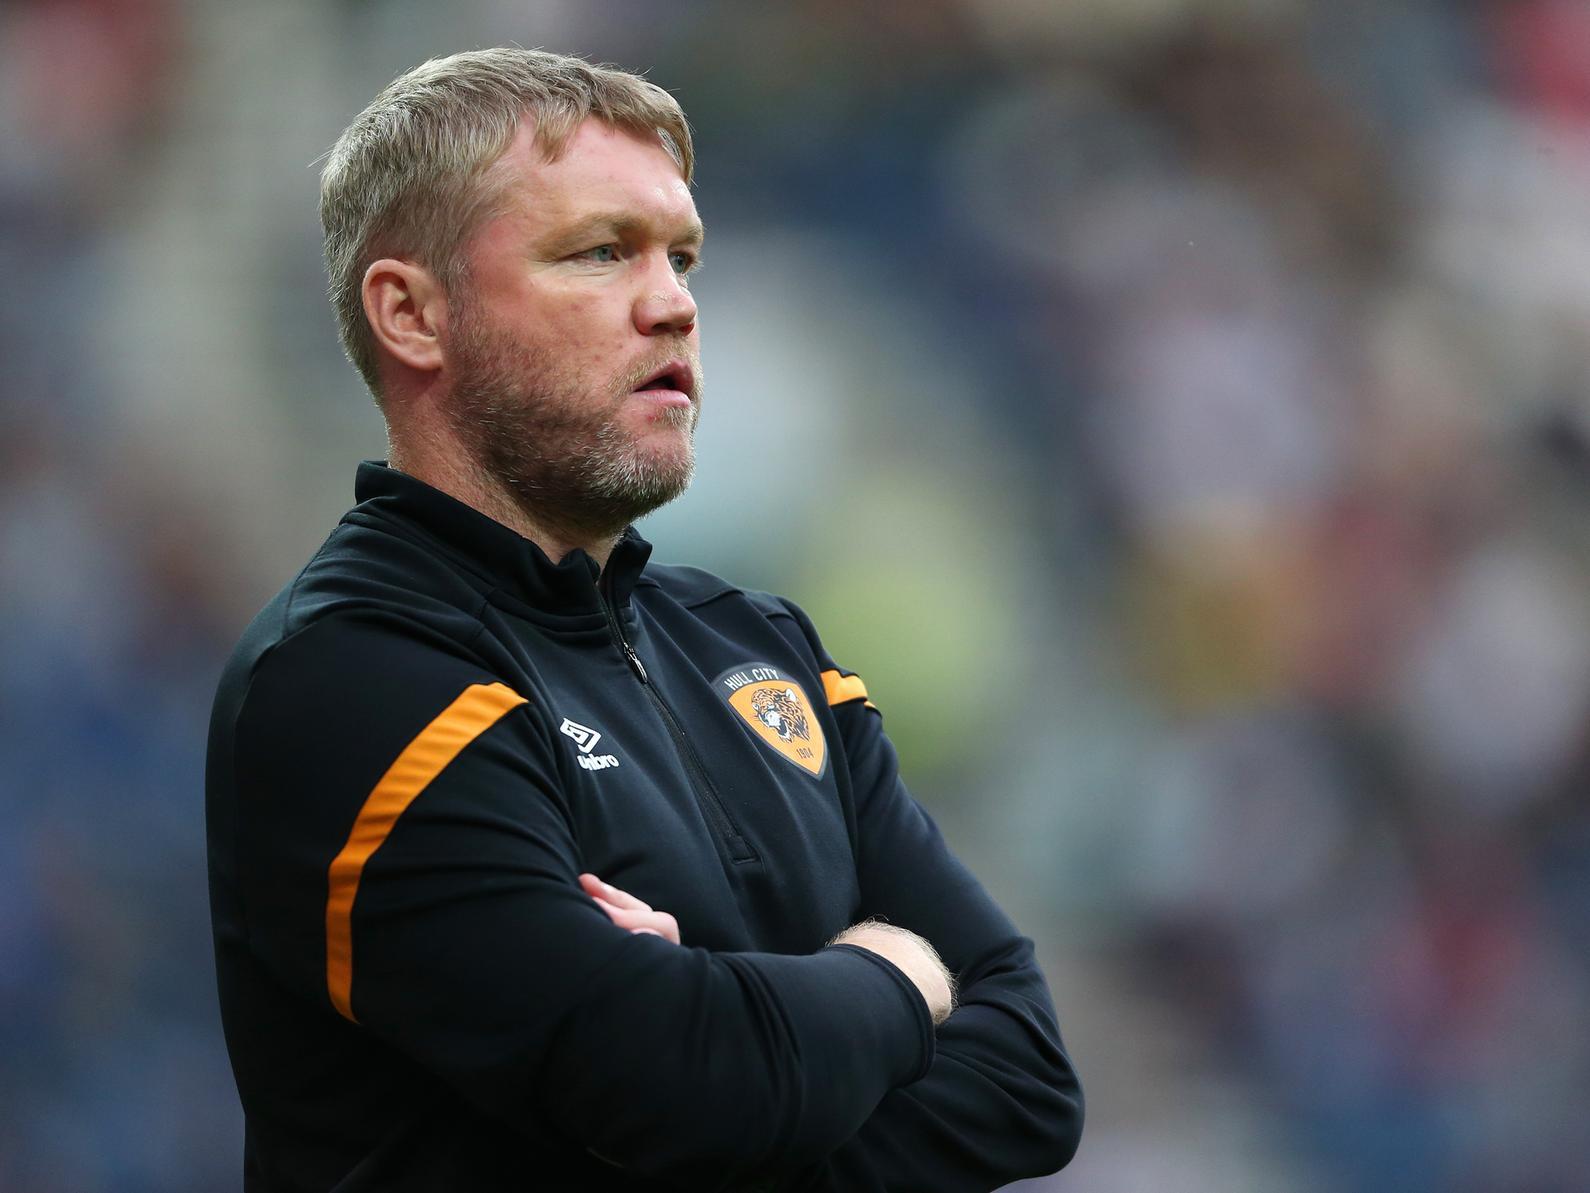 Hull City's injury crisis looks to have deepened, with January deadline day signing James Scott set to be out for a while after picking up an ankle injury in training. (Hull Daily Mail)